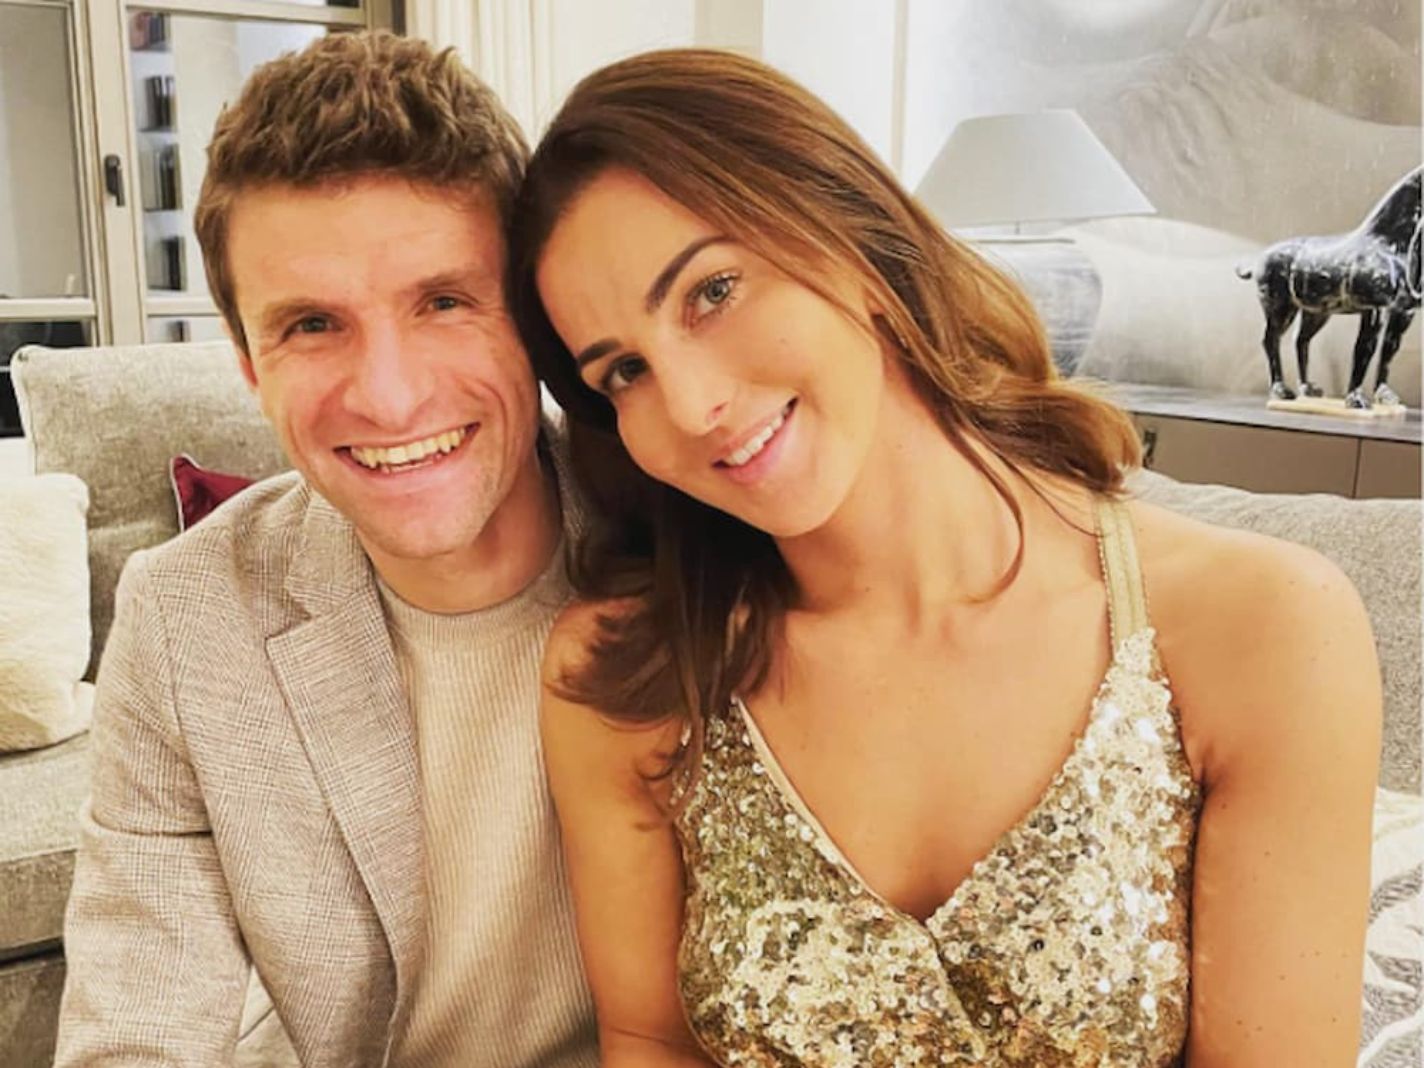 Thomas Muller’s Wife Pulls Off Shocking Insta Stunt Before Big Game